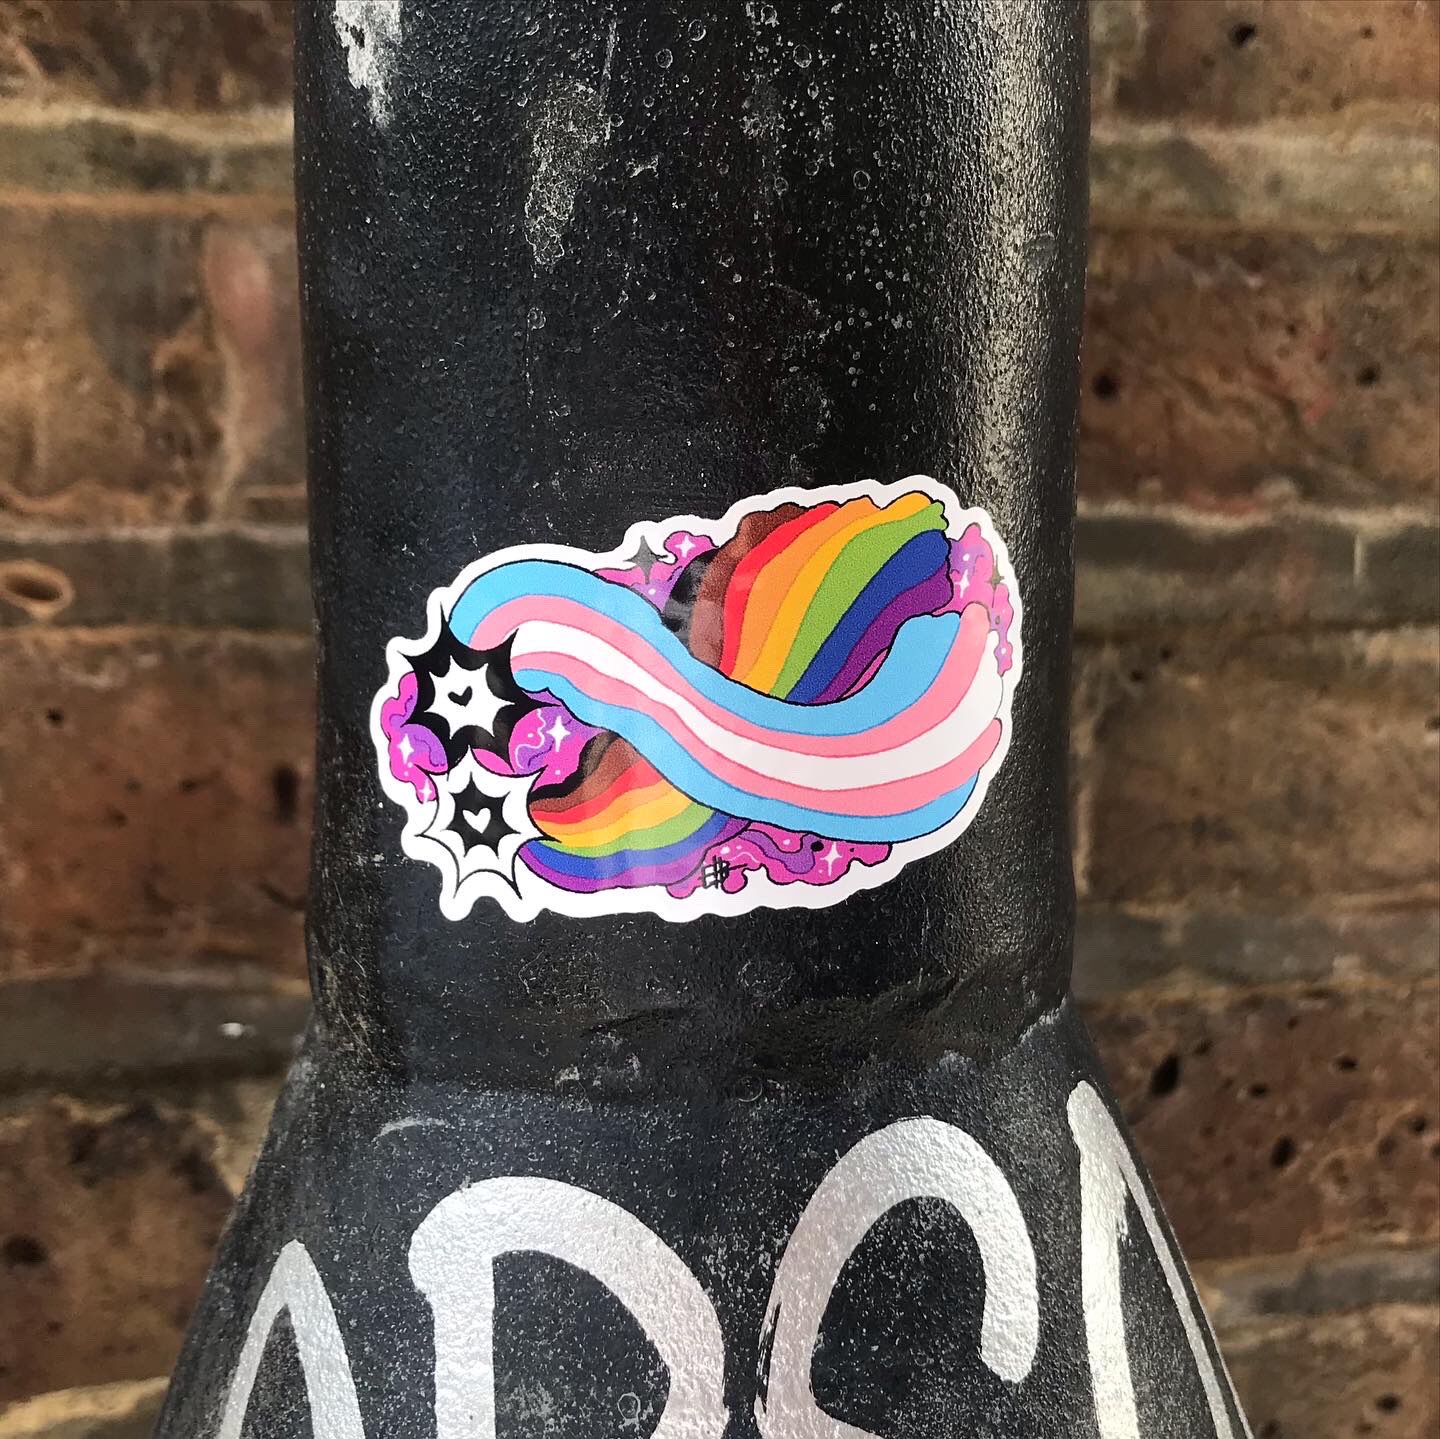 A sticker of Two shooting stars, each with a heart at the centre, one black, one white, with  comet trails of the trans and philadelphia rainbow flag respectively, surrounded by a purple nebula, wrapped around a lamppost.